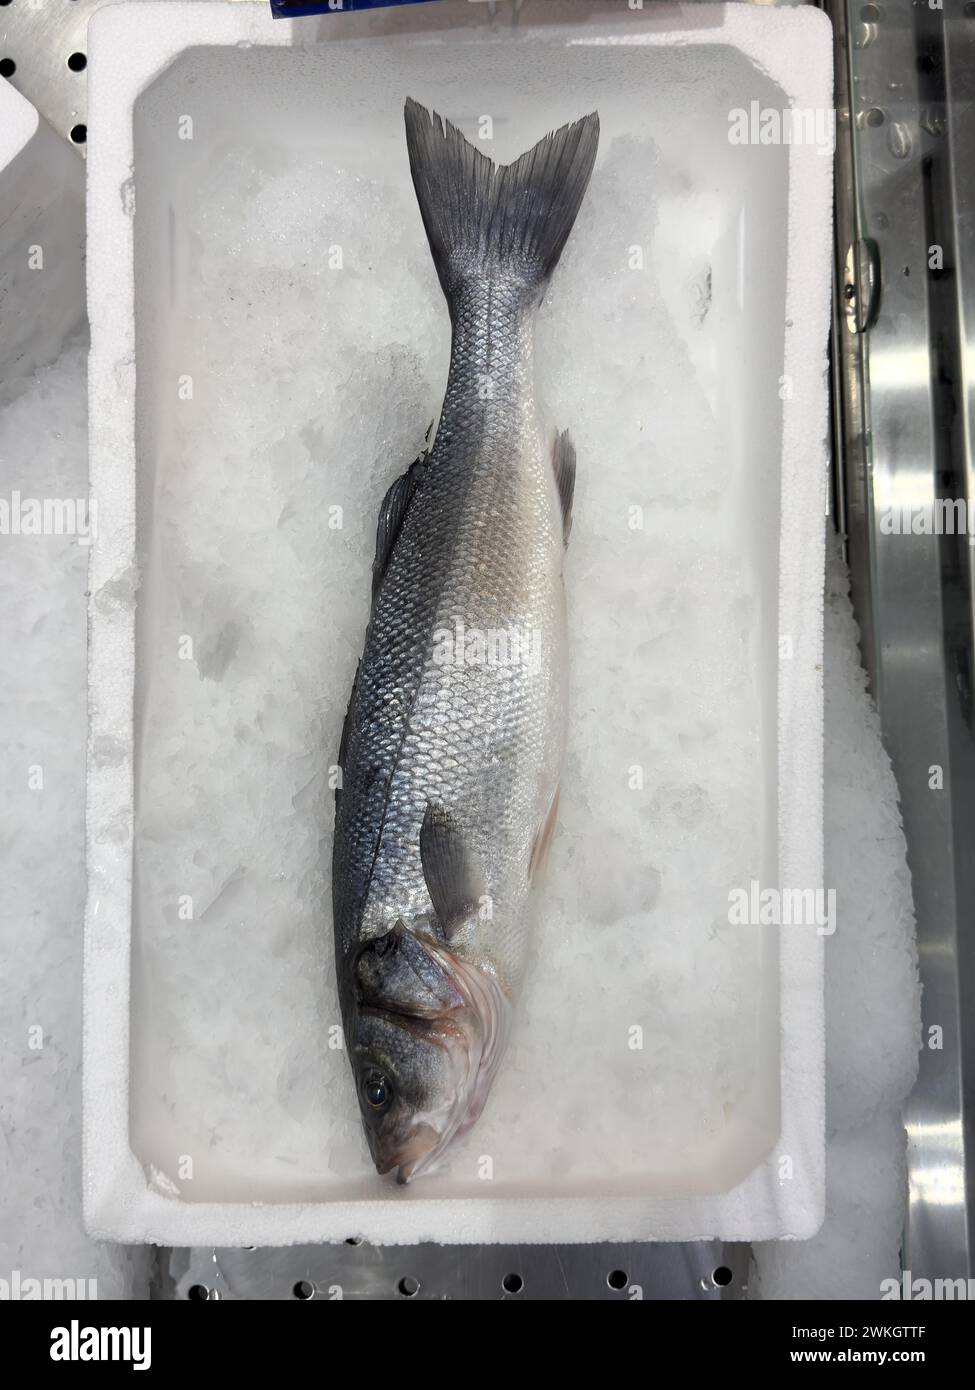 Display of fish caught whole fish temperate basses (Moronidae) Loup de Mer Branzino Spinola on ice in refrigerated counter fish counter of fishmonger Stock Photo